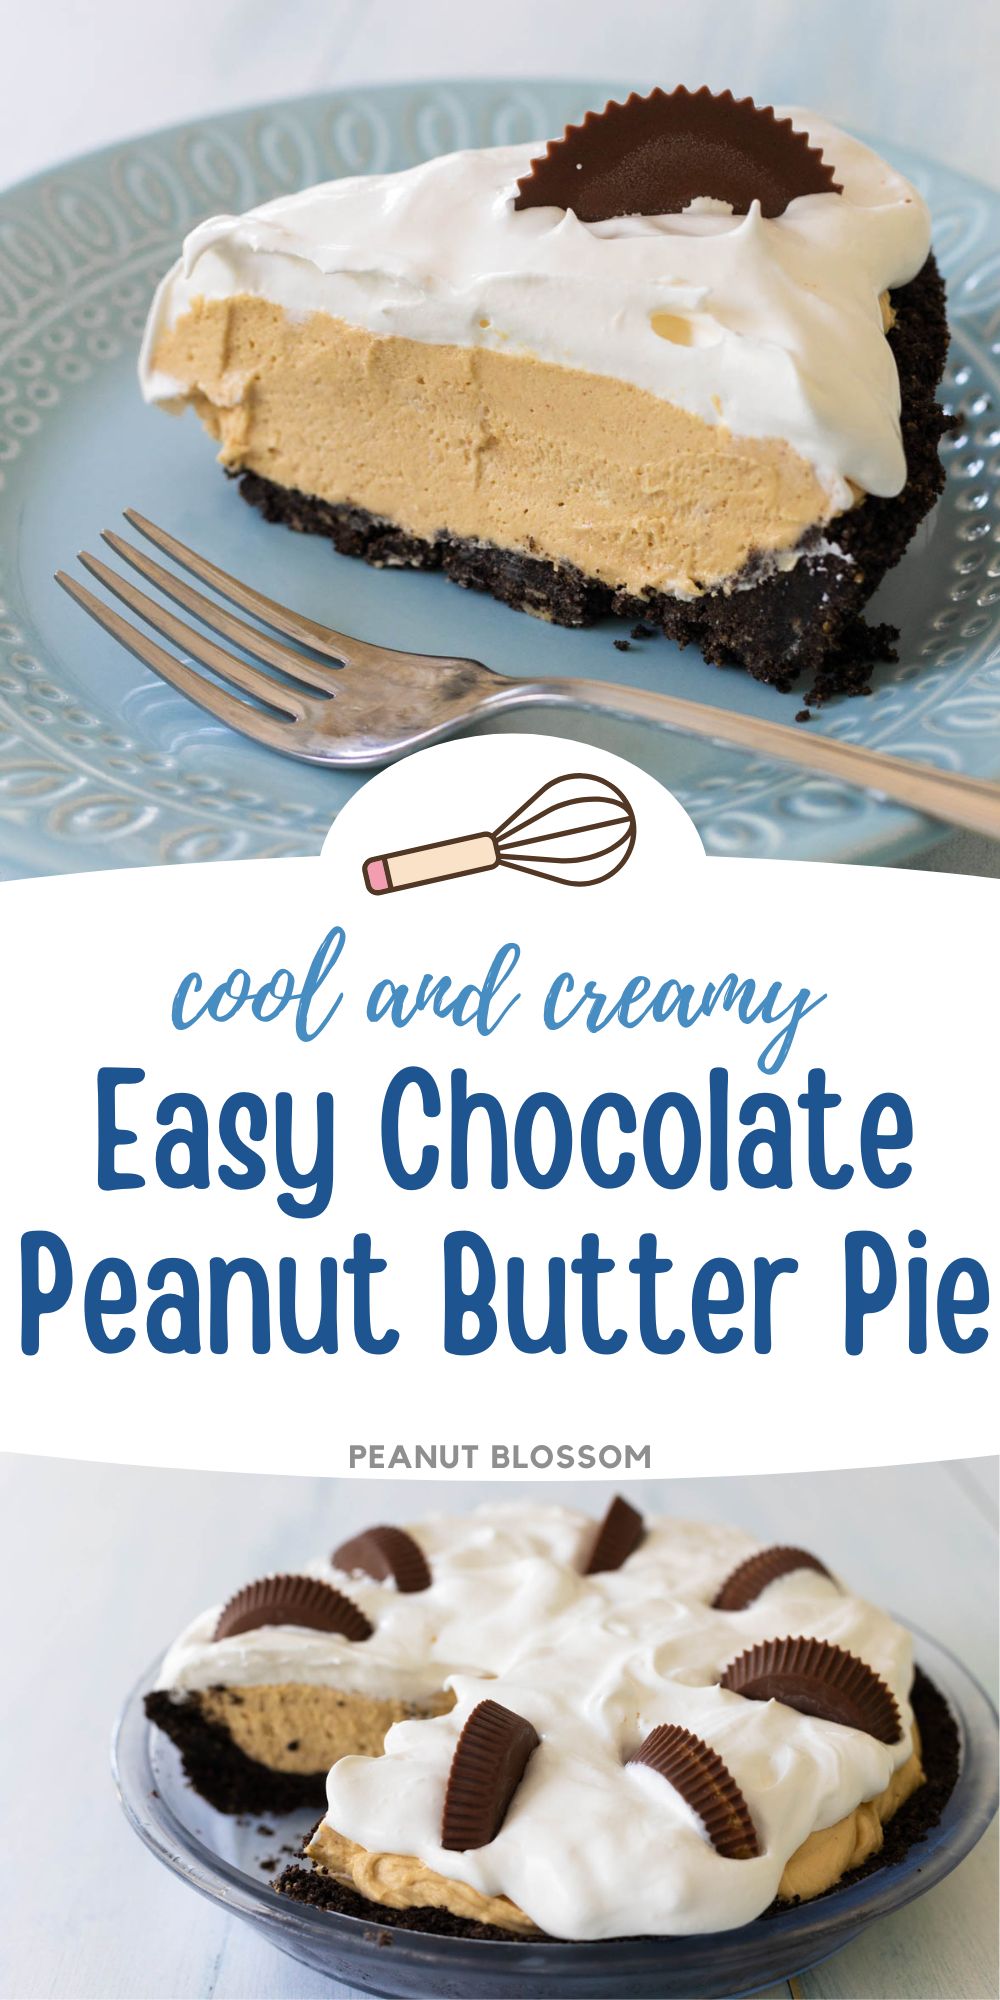 The photo collage shows a slice of the no bake peanut butter pie with Oreo cookie crust and a Reese's peanut butter cup on top next to the whole pie decorated with halved peanut butter cups in a circle.